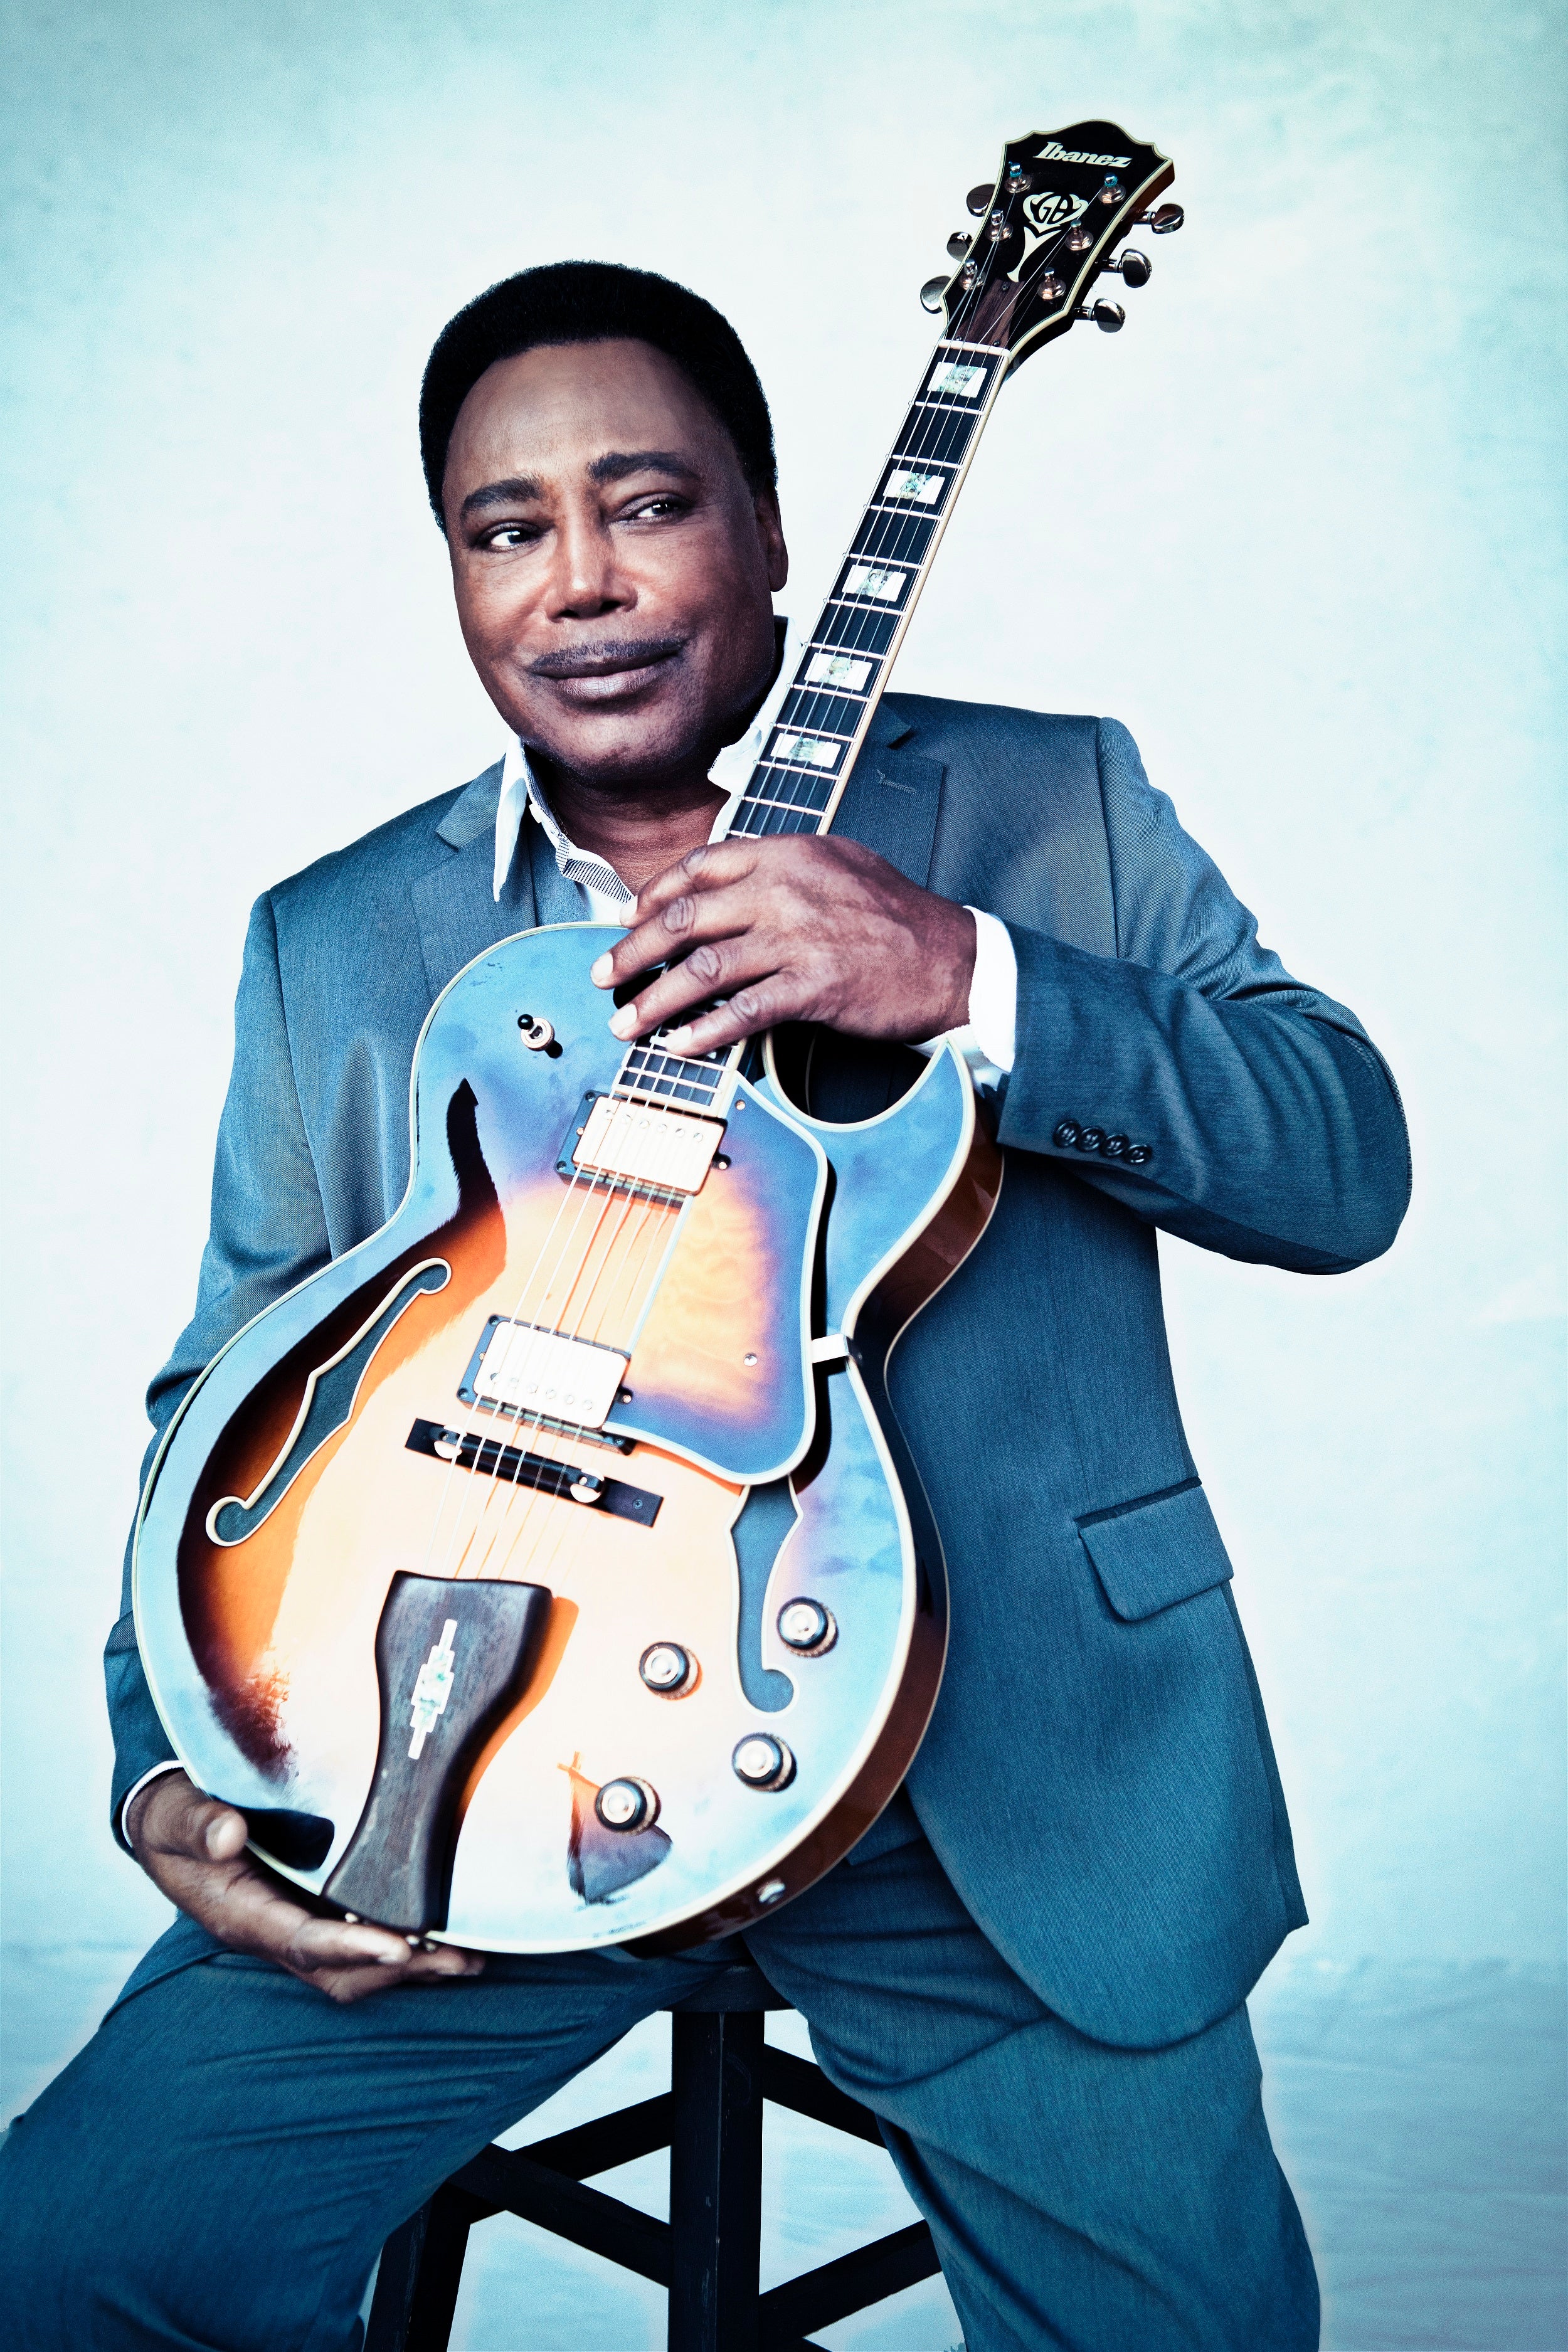 George Benson in London promo photo for Ticketmaster presale offer code